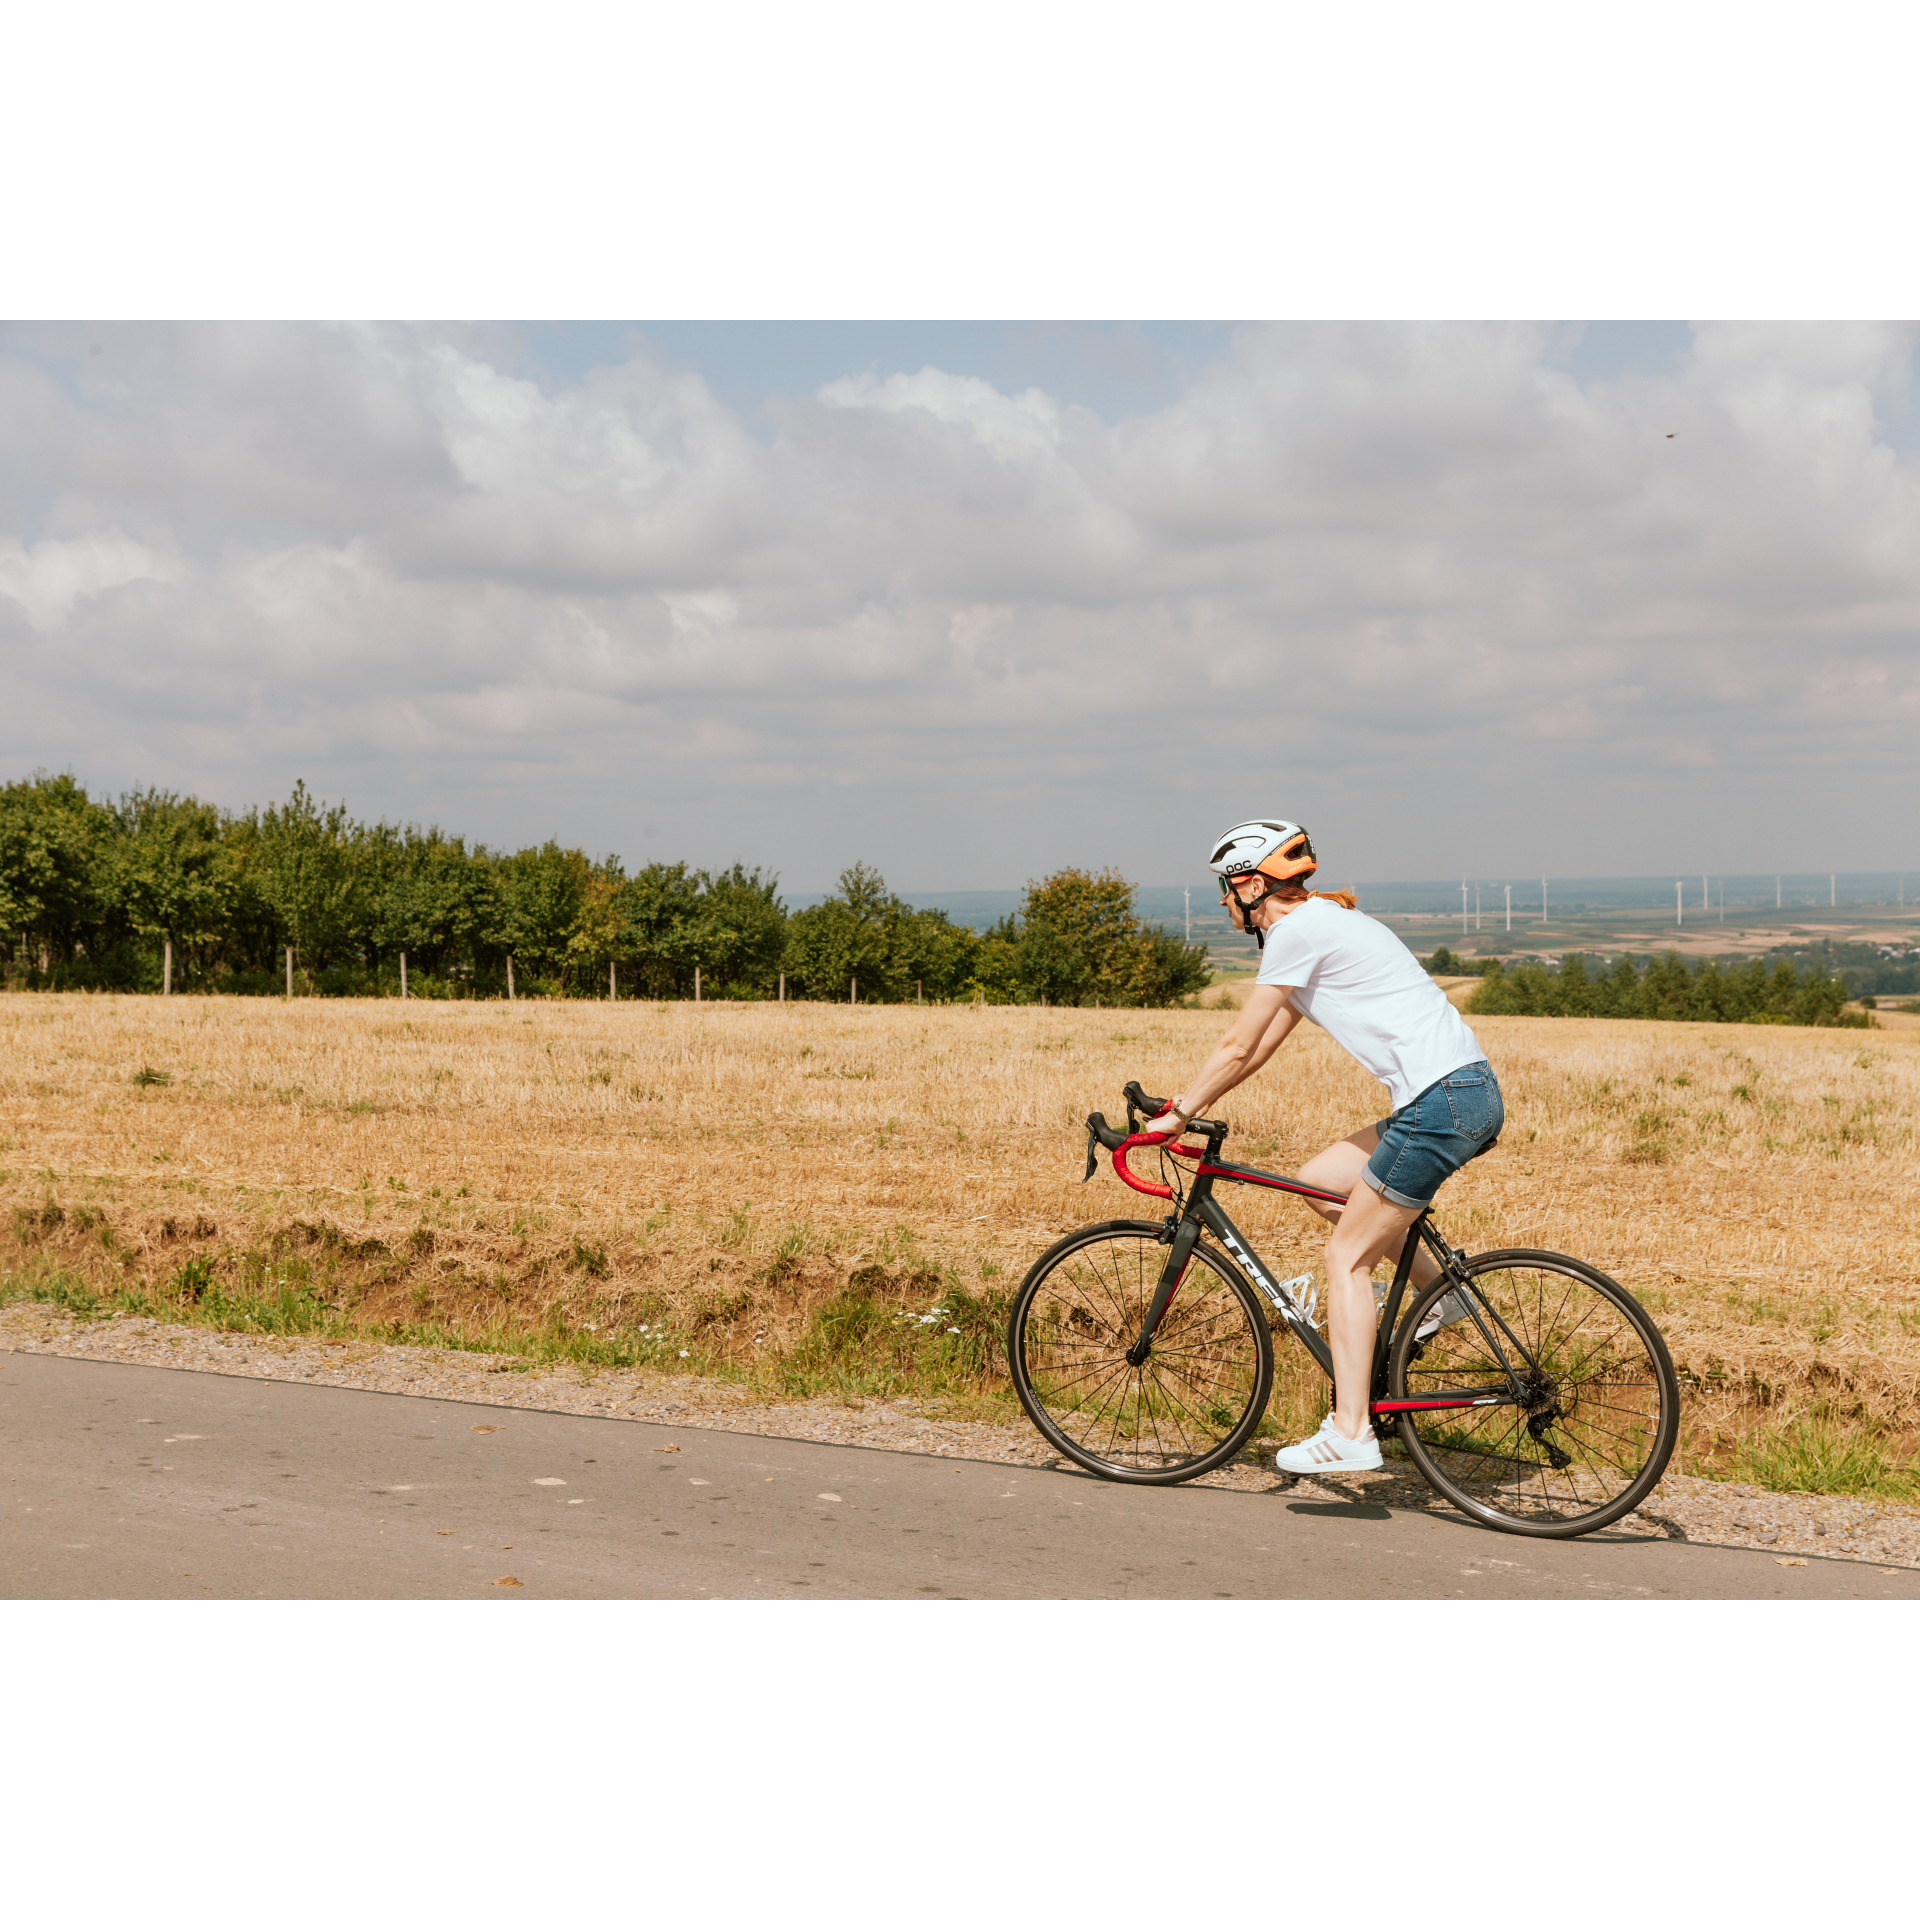 A cyclist against the background of a clearing